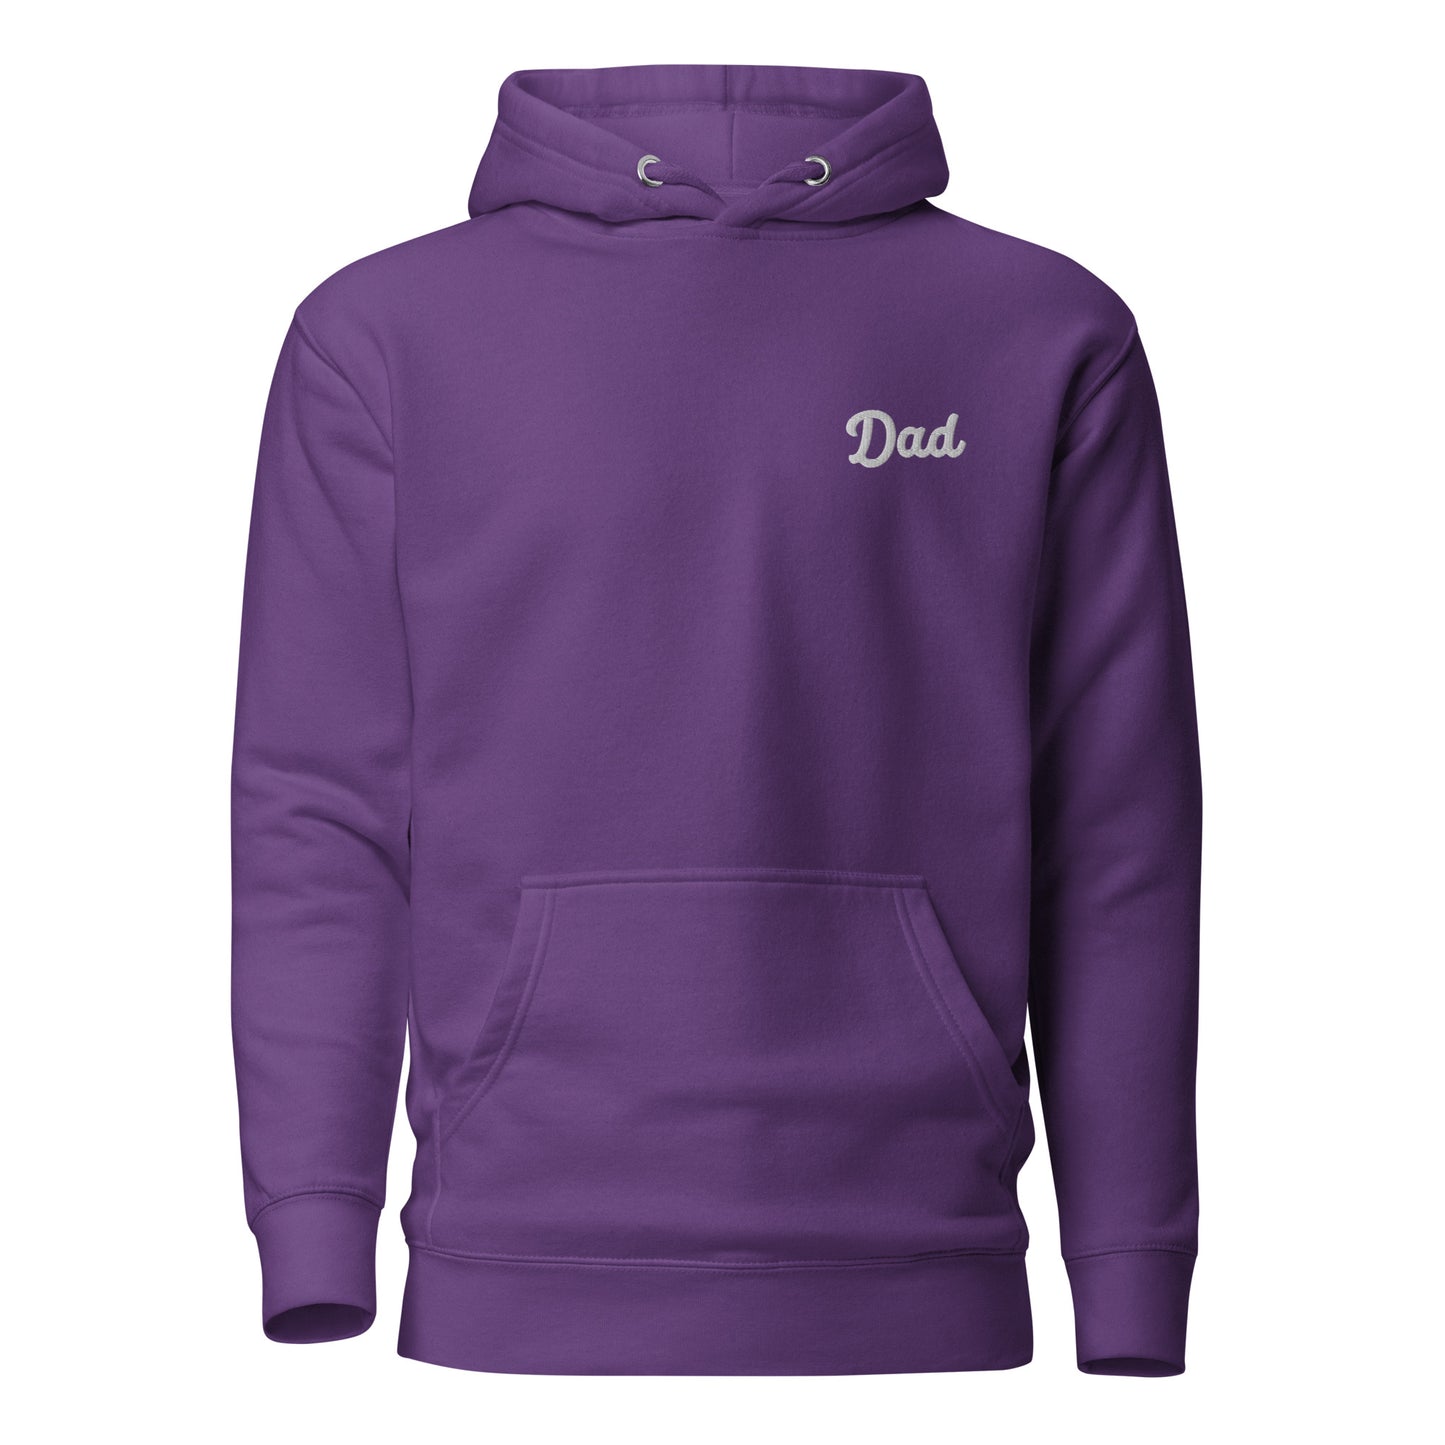 Dad Embroidered Hoodie